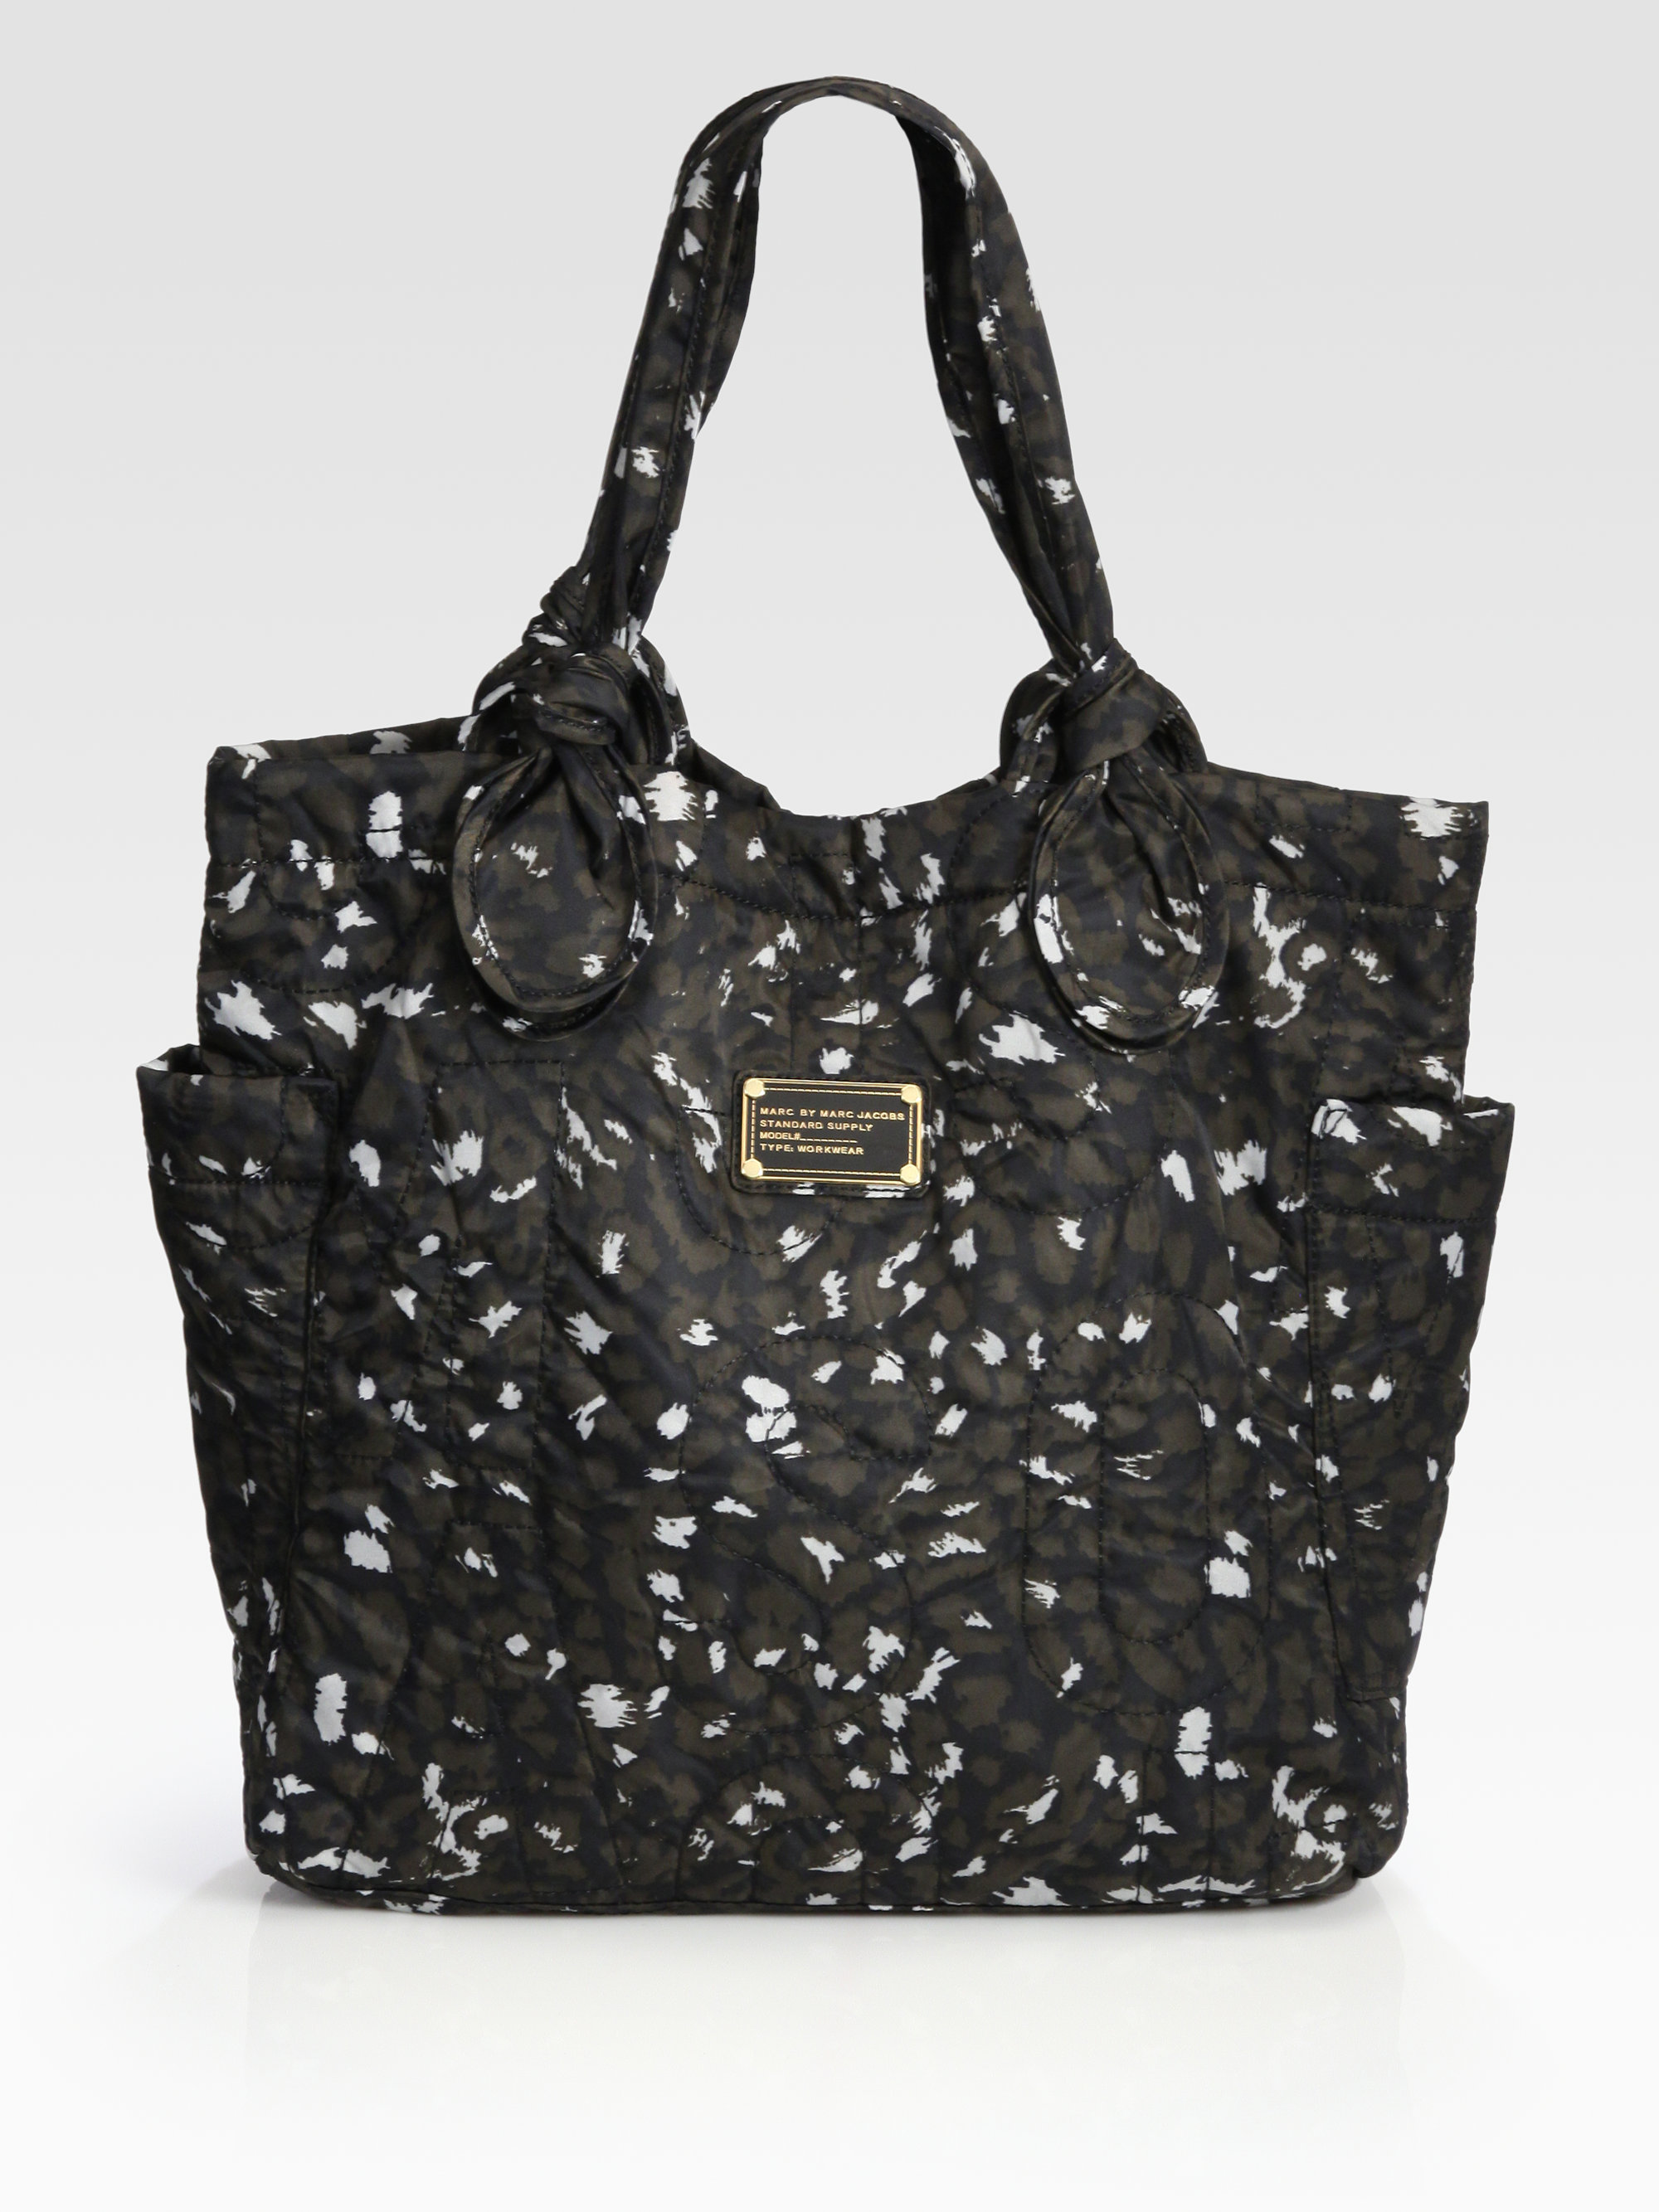 Marc By Marc Jacobs Pretty Printed Nylon Tote Bag in Black - Lyst